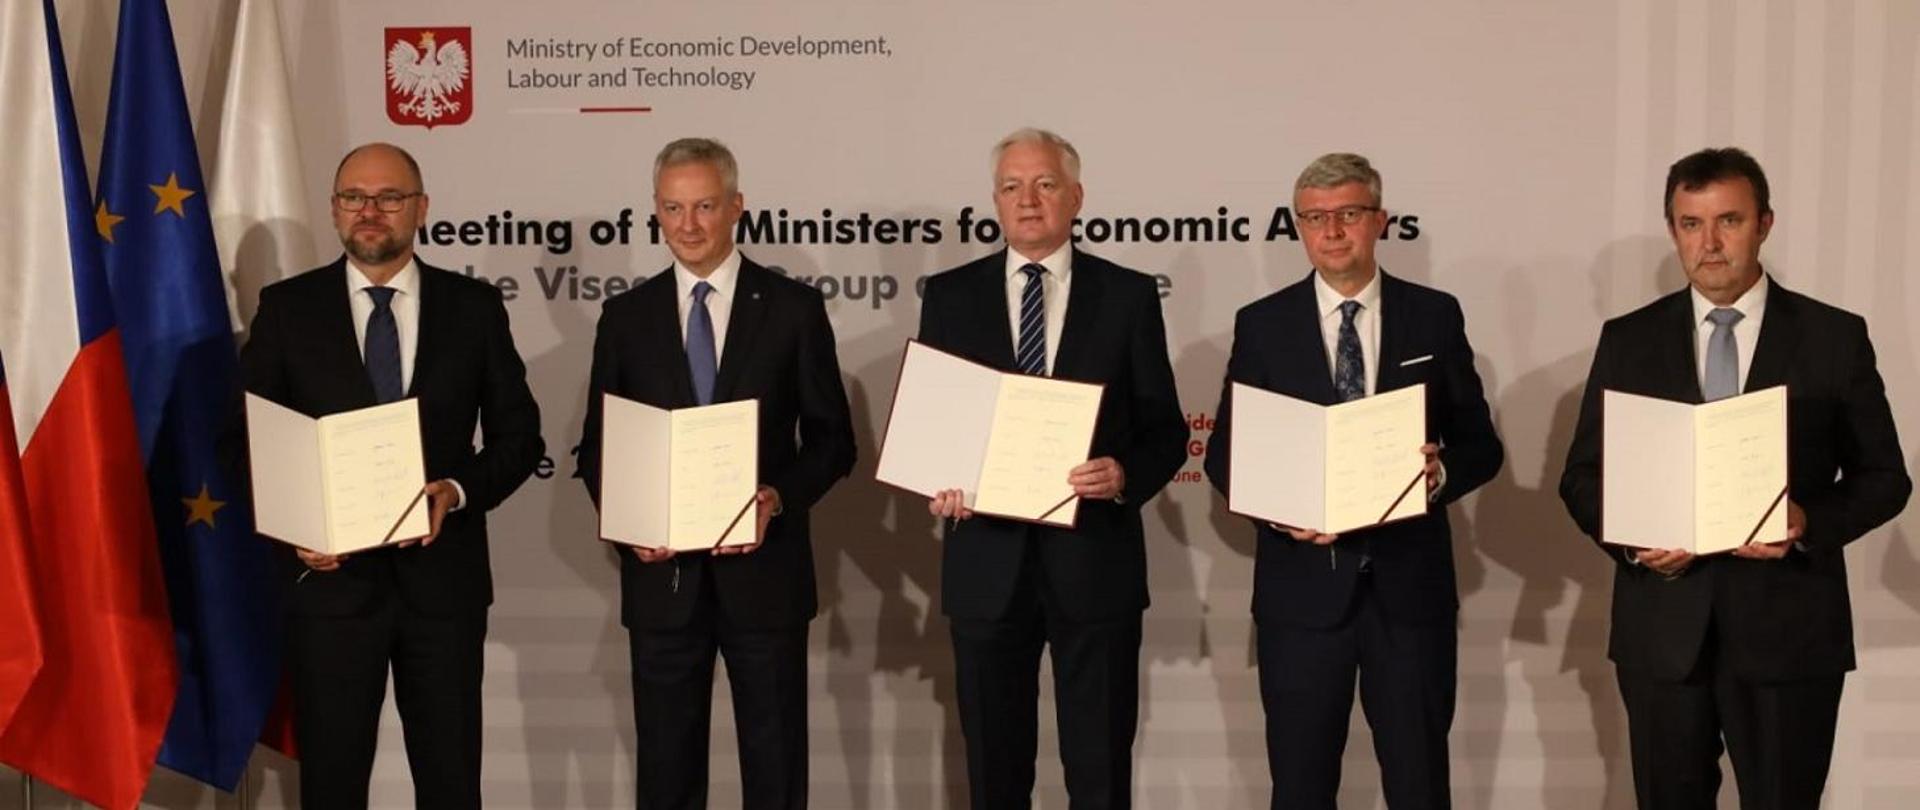 Ministers for economic affairs of the V4 Group and France, holding in their hands the signed Joint Declaration of the Visegrad Group and France on mutual cooperation in the development of the pharmaceutical industry, from the left Deputy Prime Minister and Minister of Economy of Slovakia Richard Sulík, Minister of Economy and Finance of France Bruno Le Maire, Deputy Prime Minister and Minister Development, Labor and Technology Jarosław Gowin, Deputy Prime Minister and Minister of Industry and Trade of the Czech Republic Karel Havlíček and Minister of Innovation and Technology of Hungary László Palkovics 